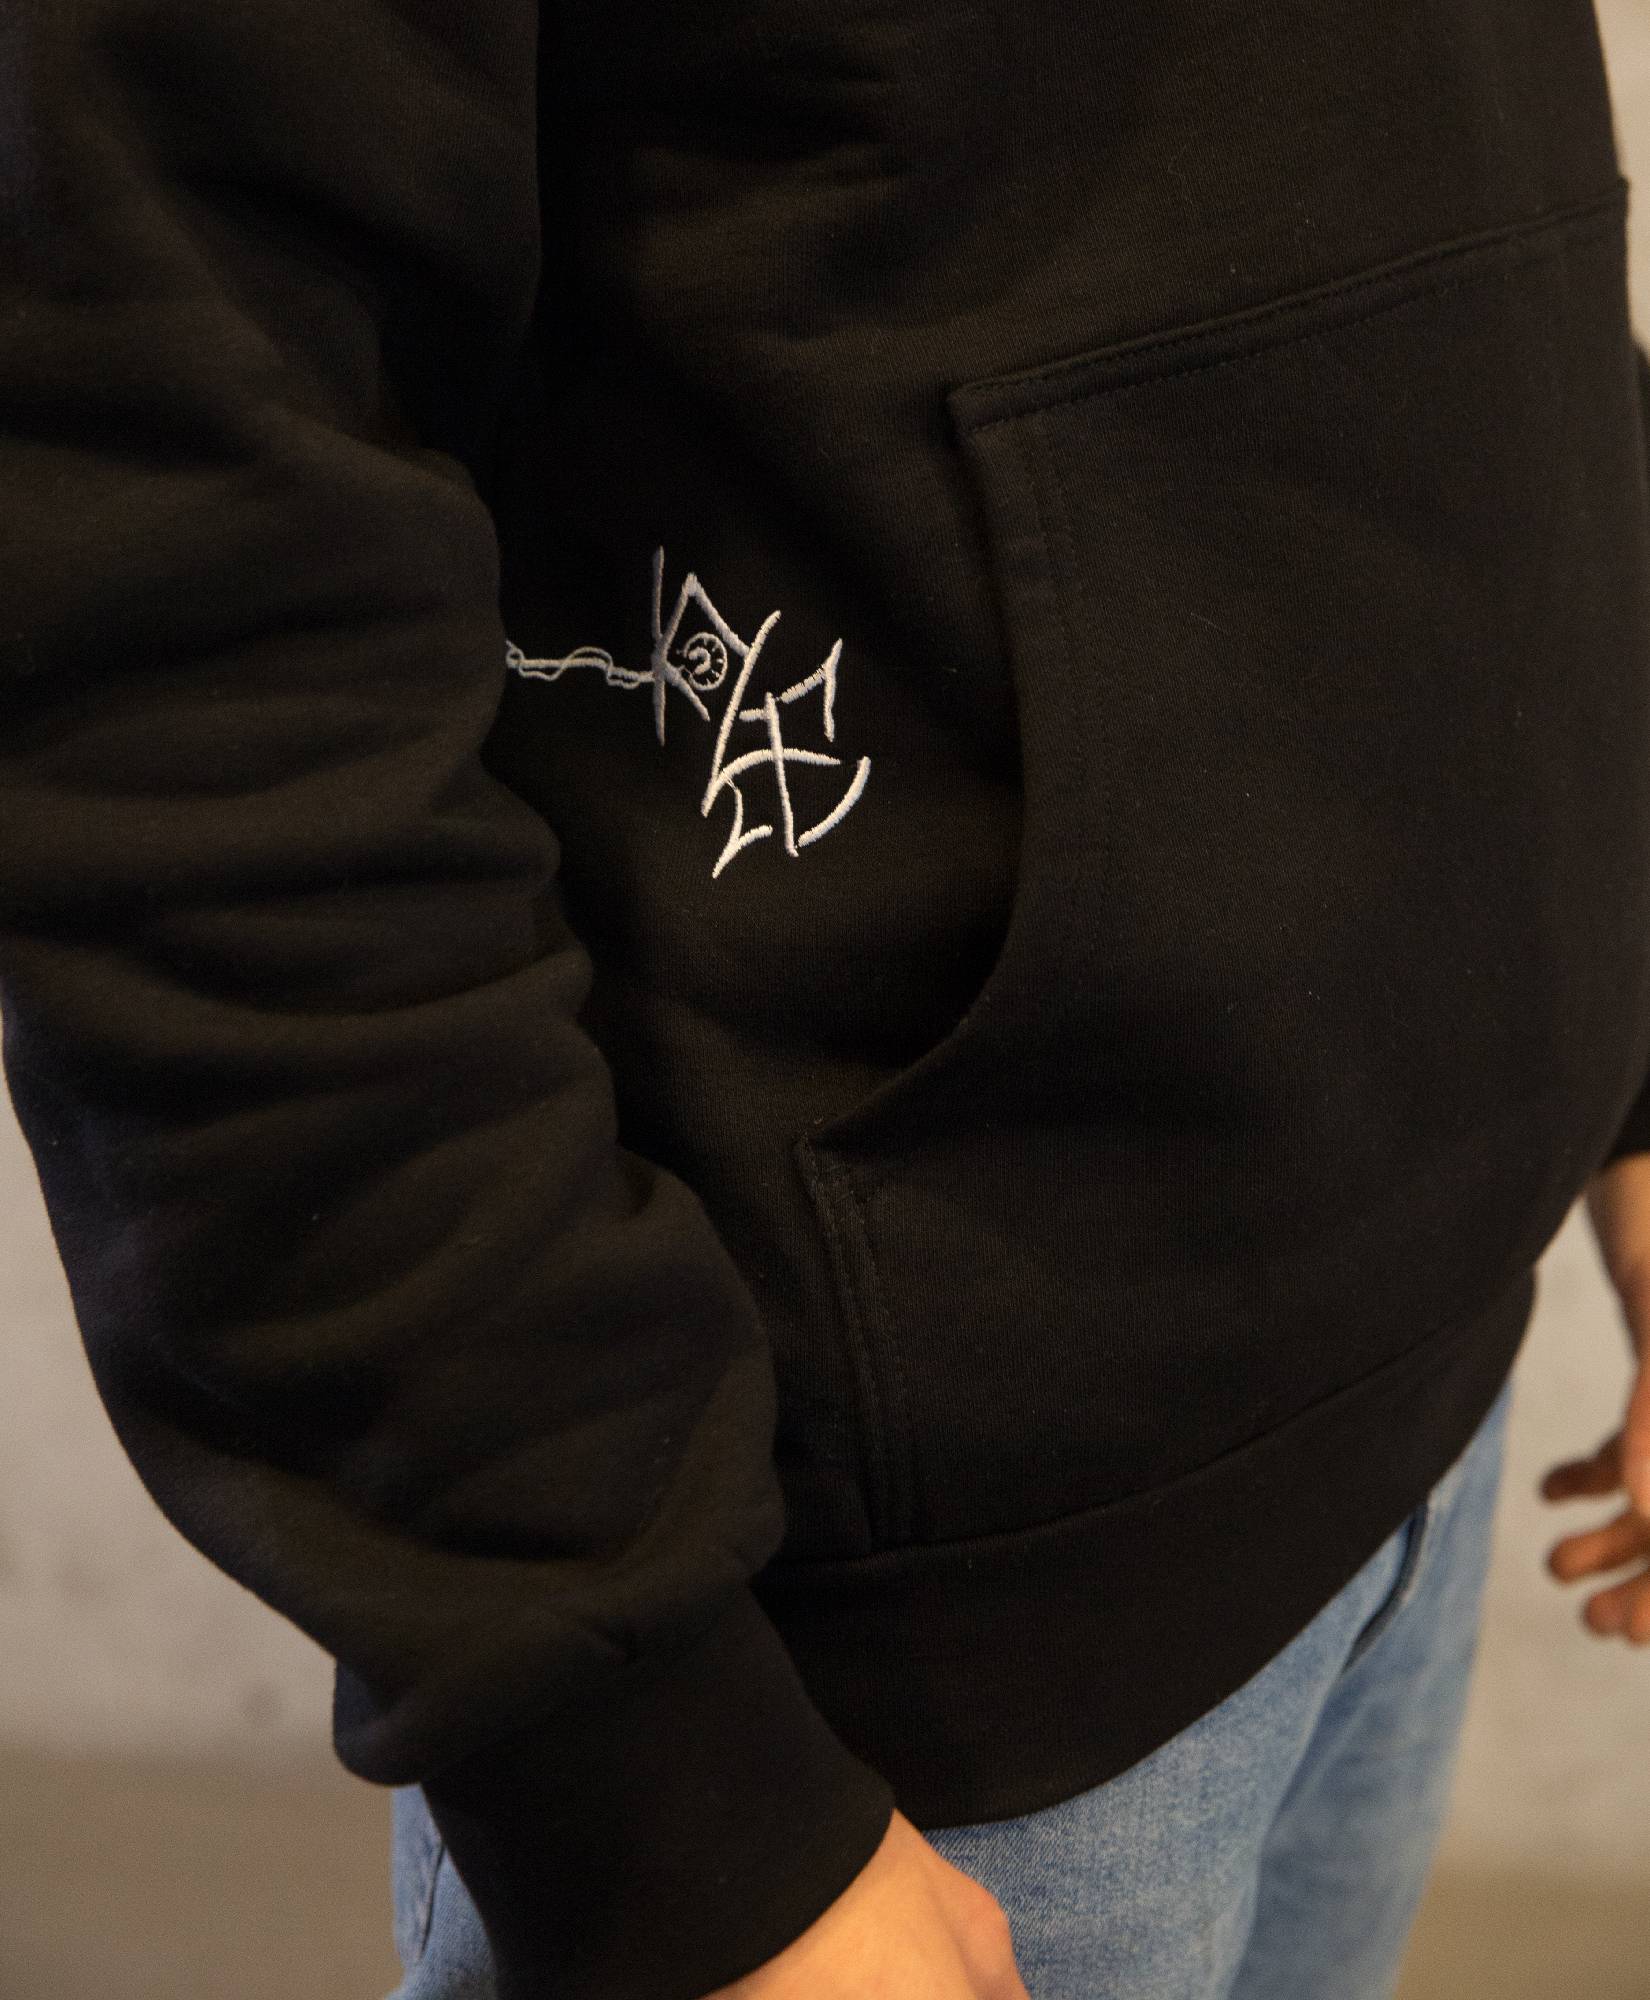 Embroidered art on Cotton Black Hoodie / Stitched Hoody of Kobe Bryant